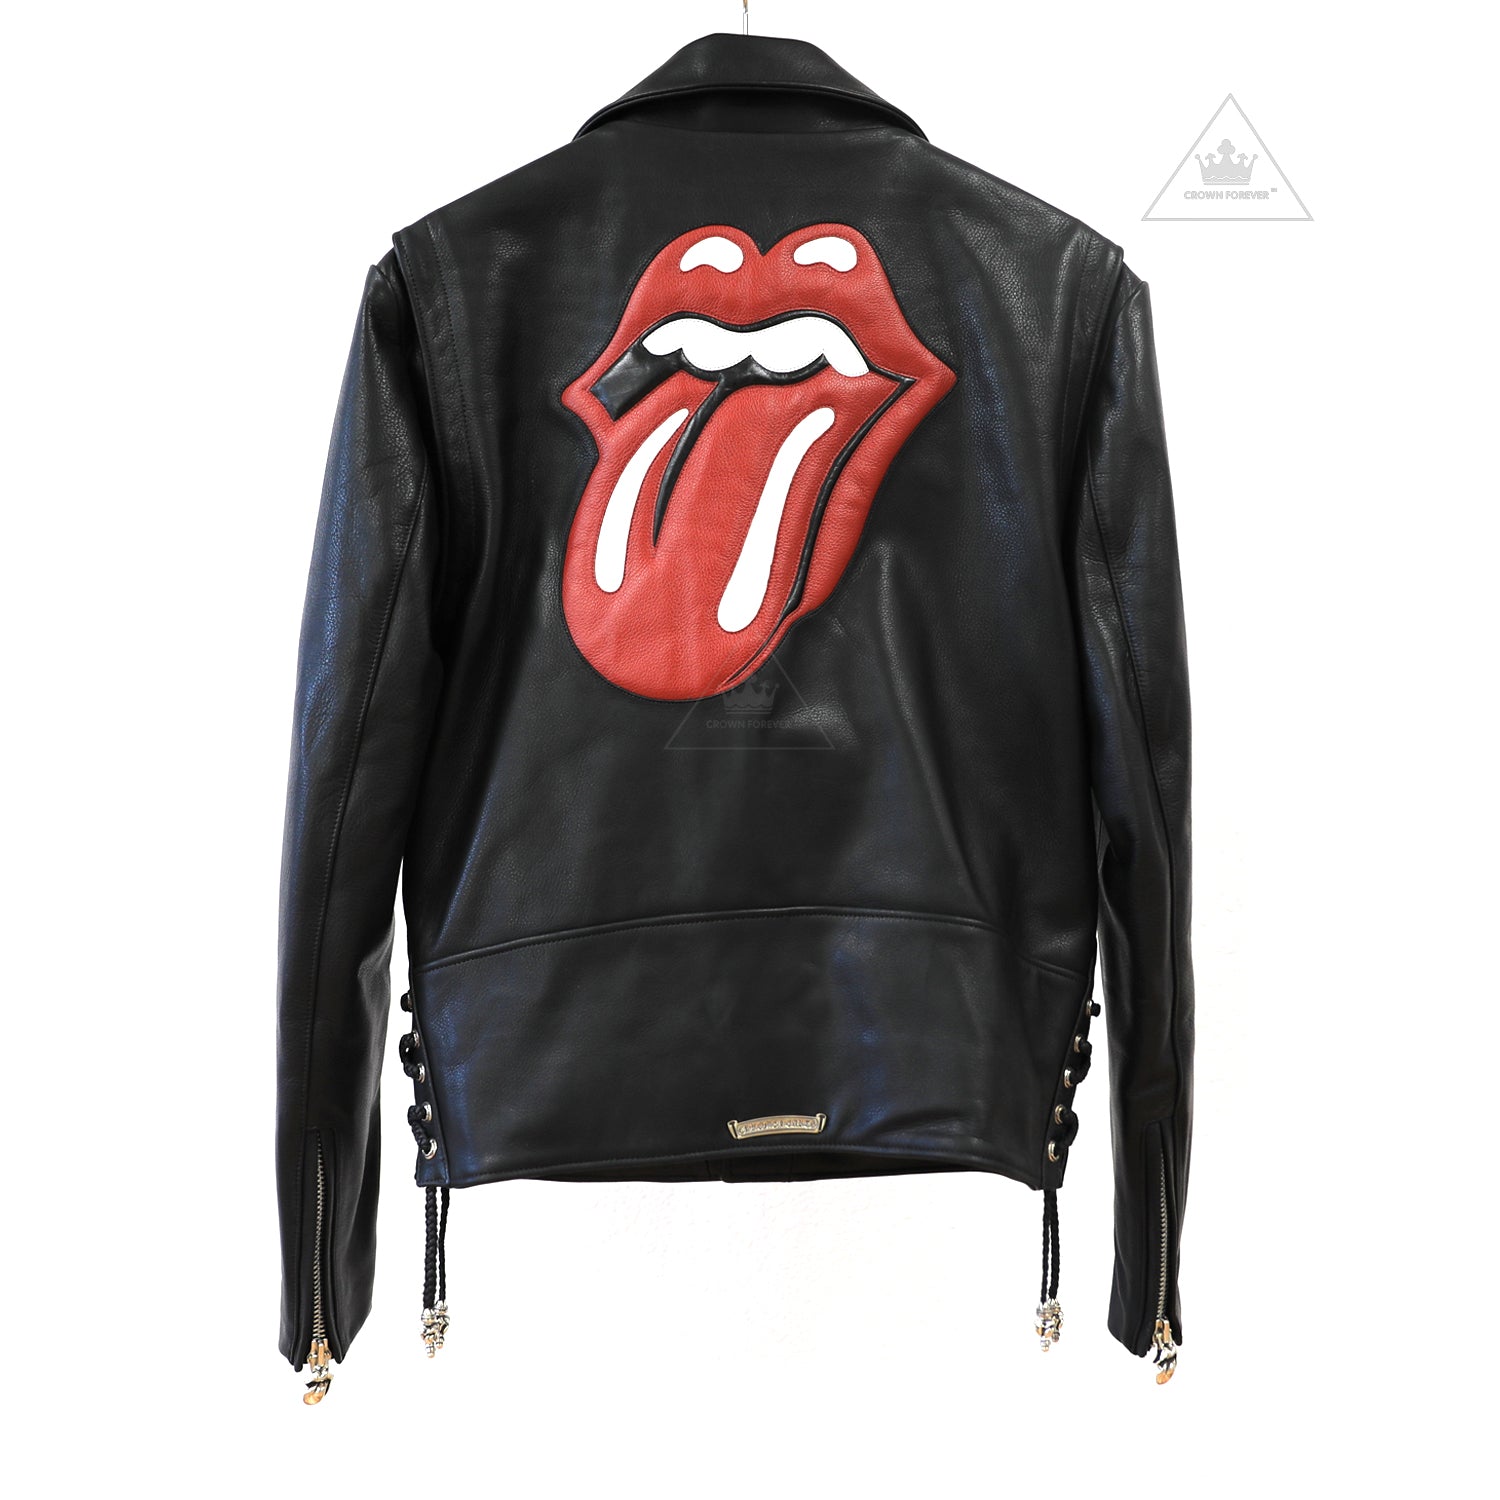 chrome hearts rolling stones hoodie